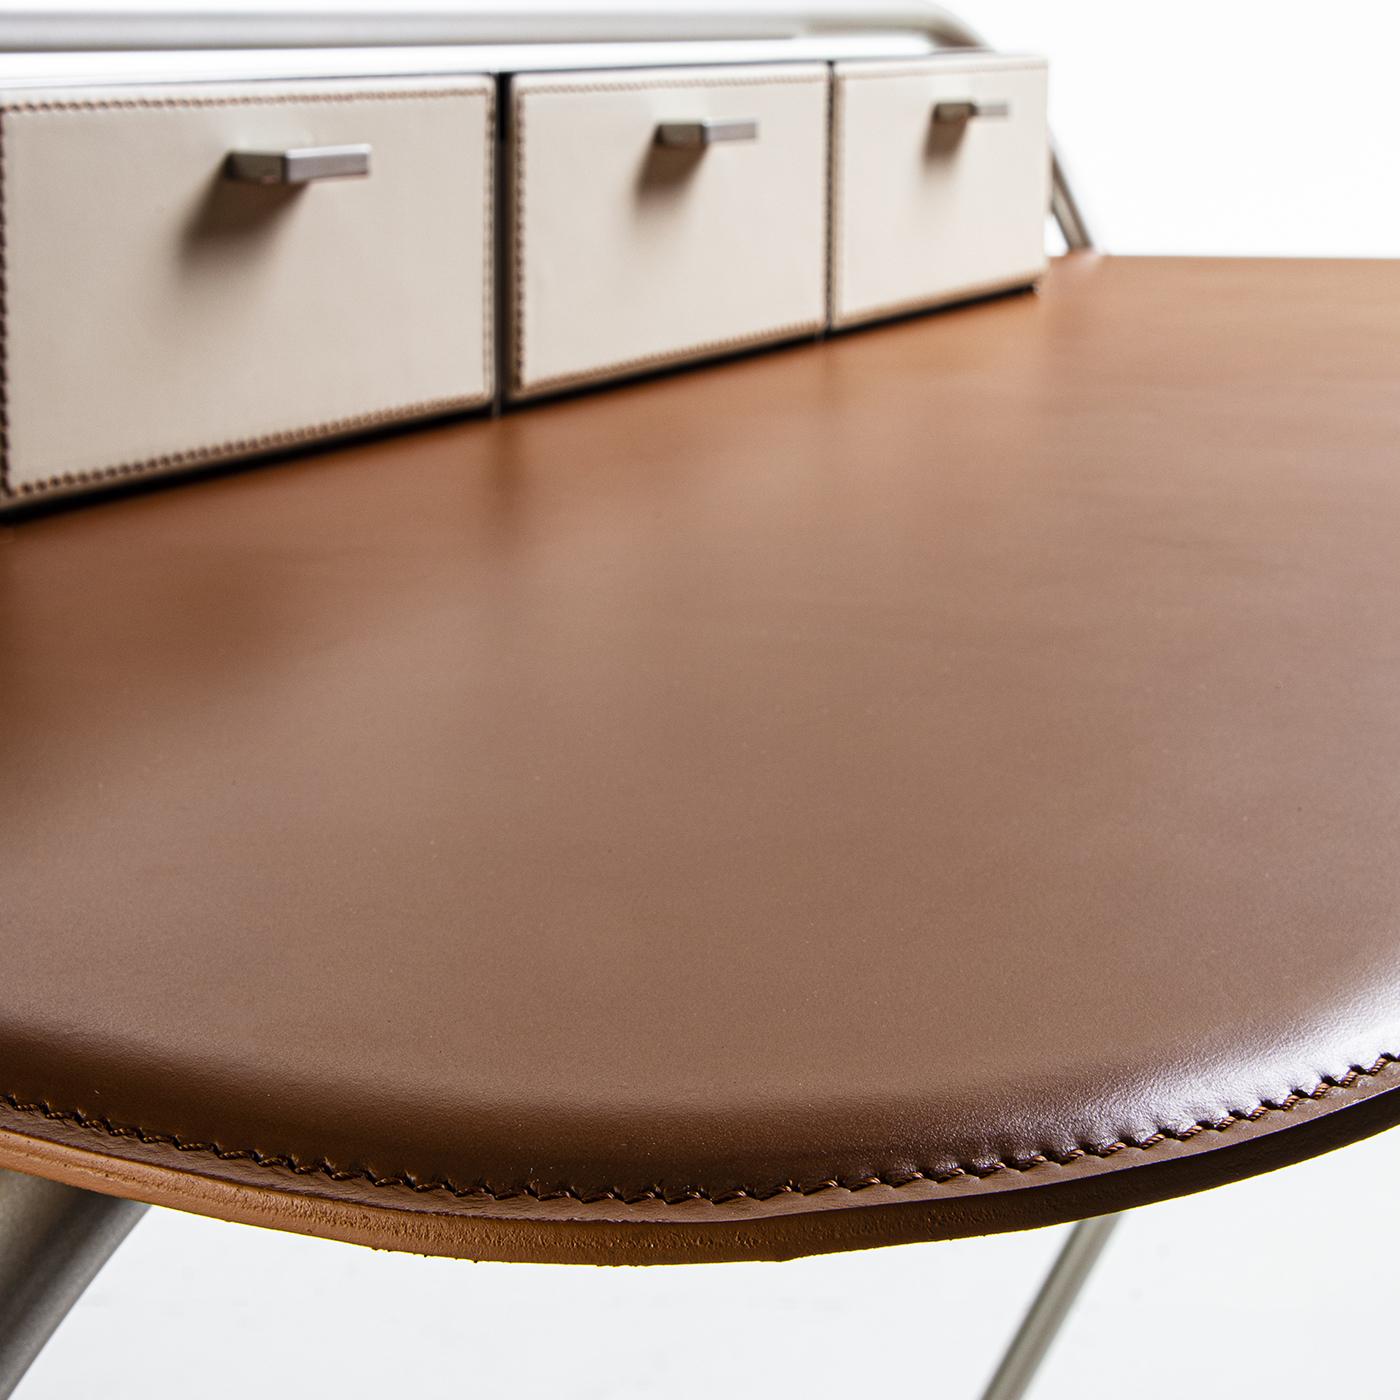 In line with Studio Nove.3 style, Enea is an essential desk where metal and hard leather are combined in the most refined way. Made of a tubular metal frame lacquered in different finishes, including gold, champagne, and bronze. It has a cowhide top